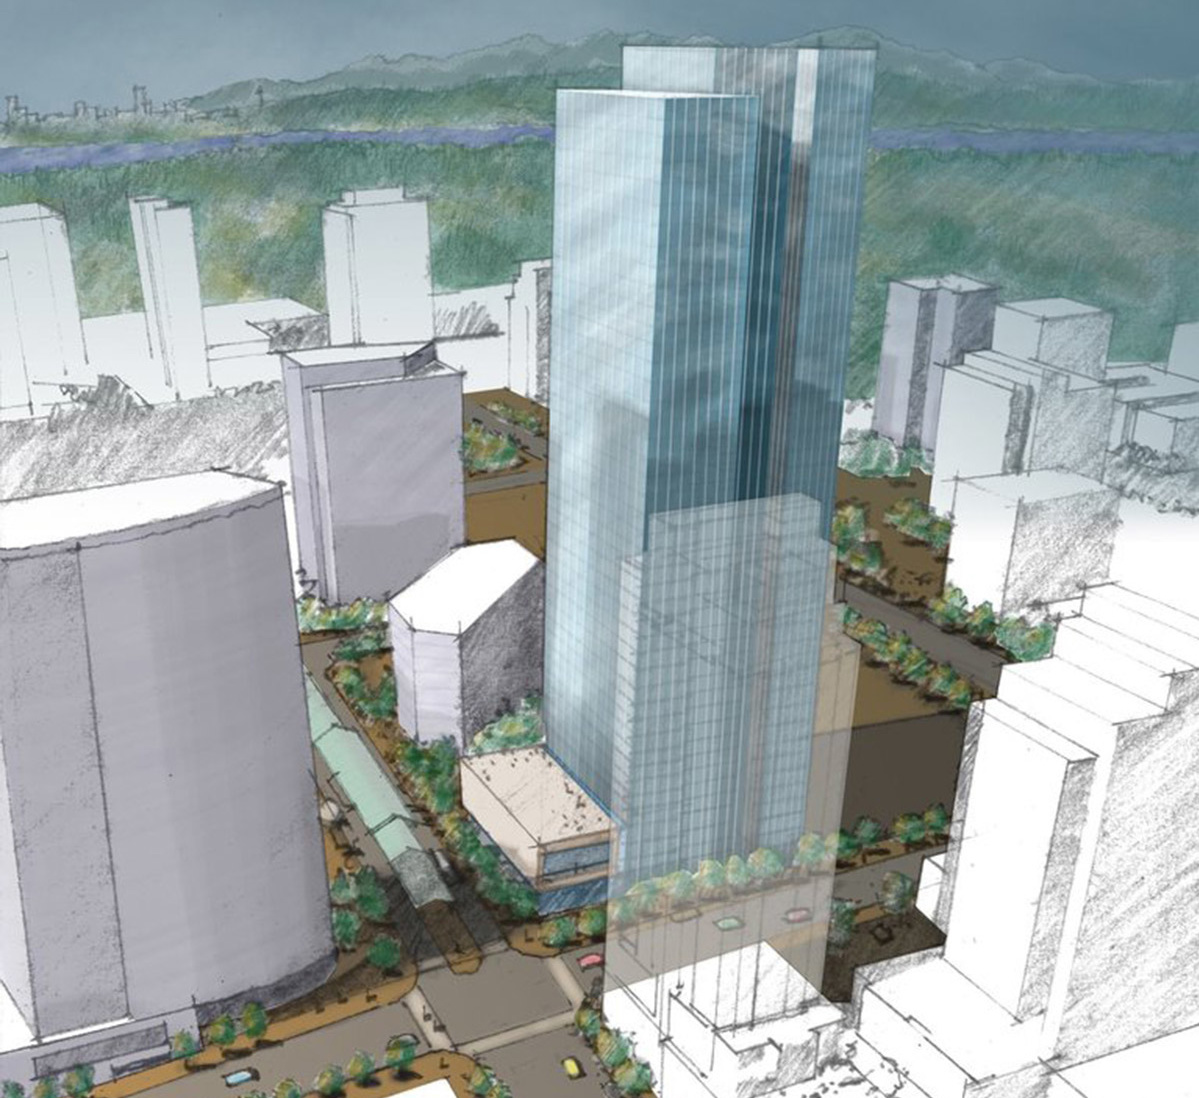 Amazon will build its tallest office tower ever in Bellevue, Washington